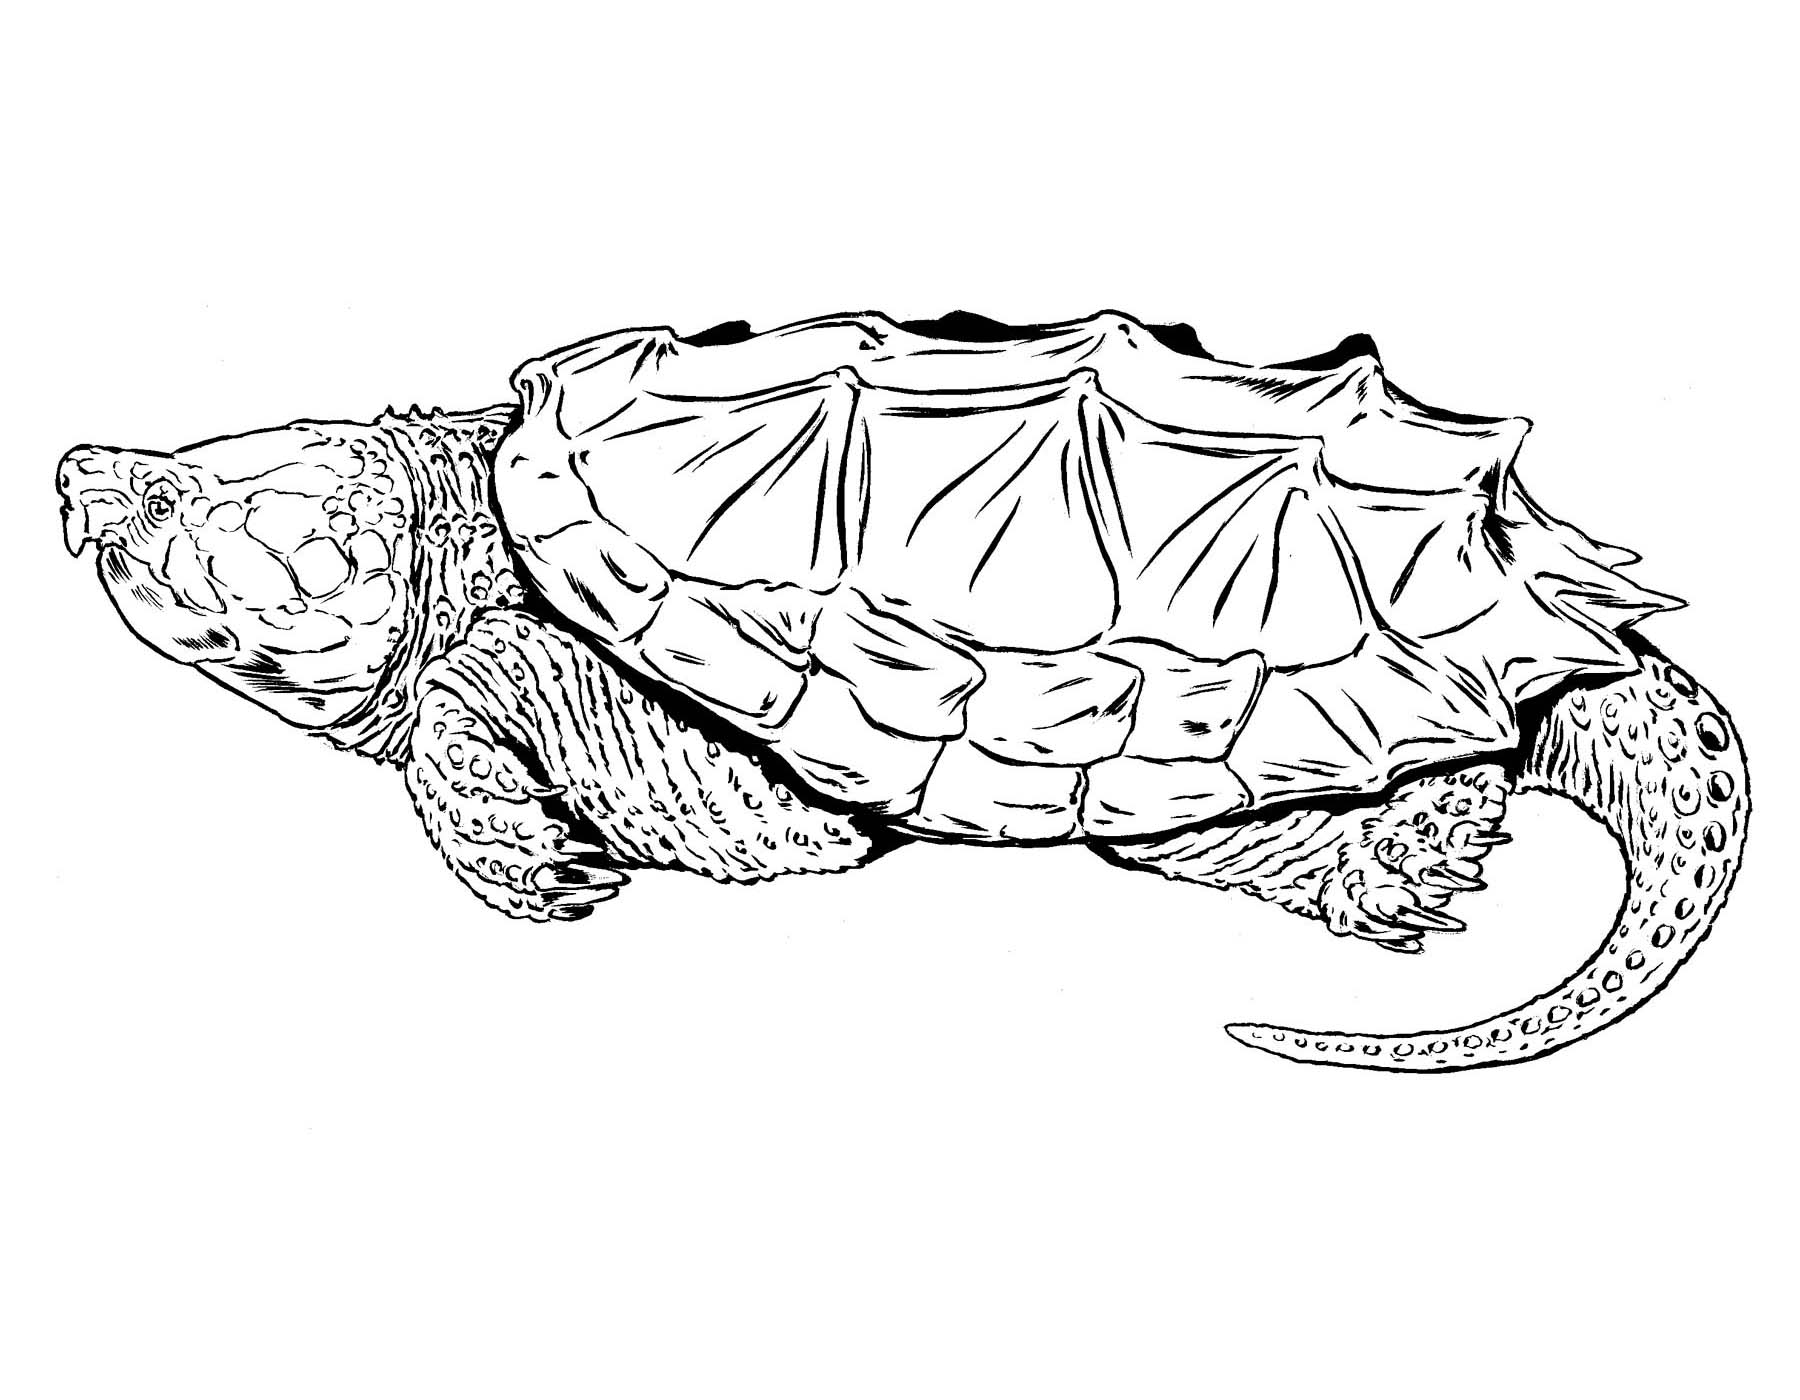 Alligator Snapping Turtle coloring #13, Download drawings